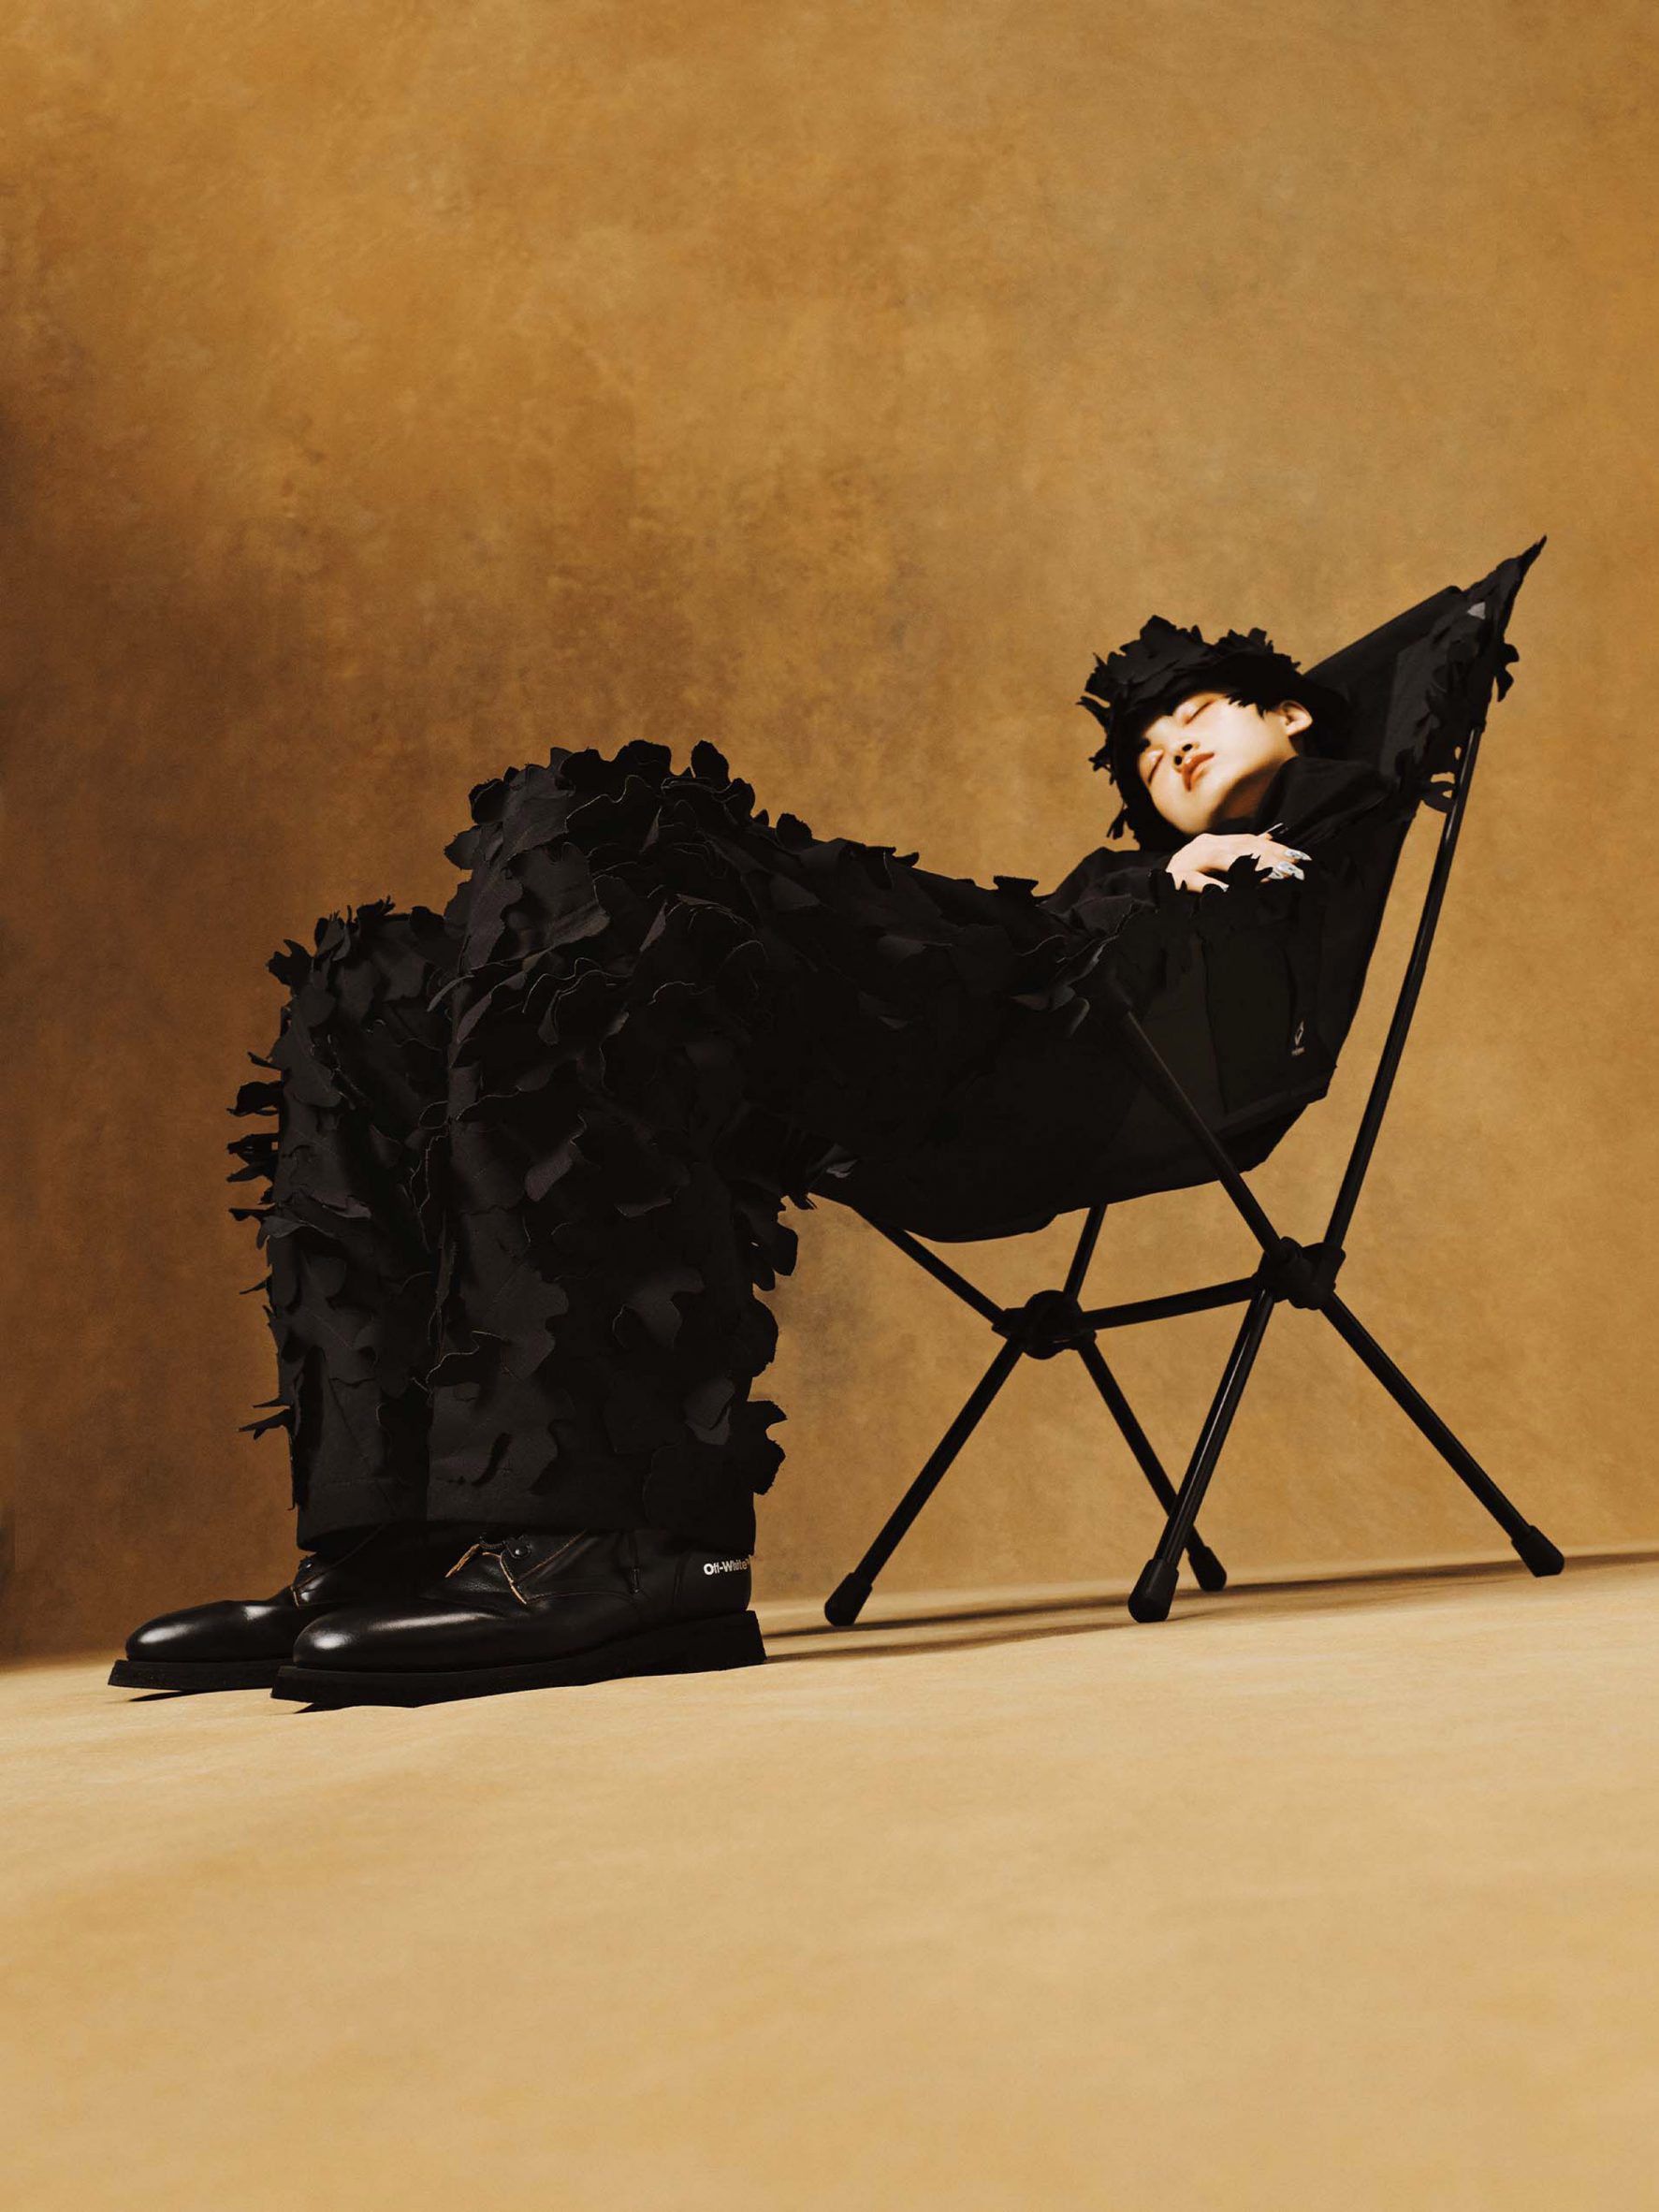 Model sat in chair wearing black out fit with applique leafs